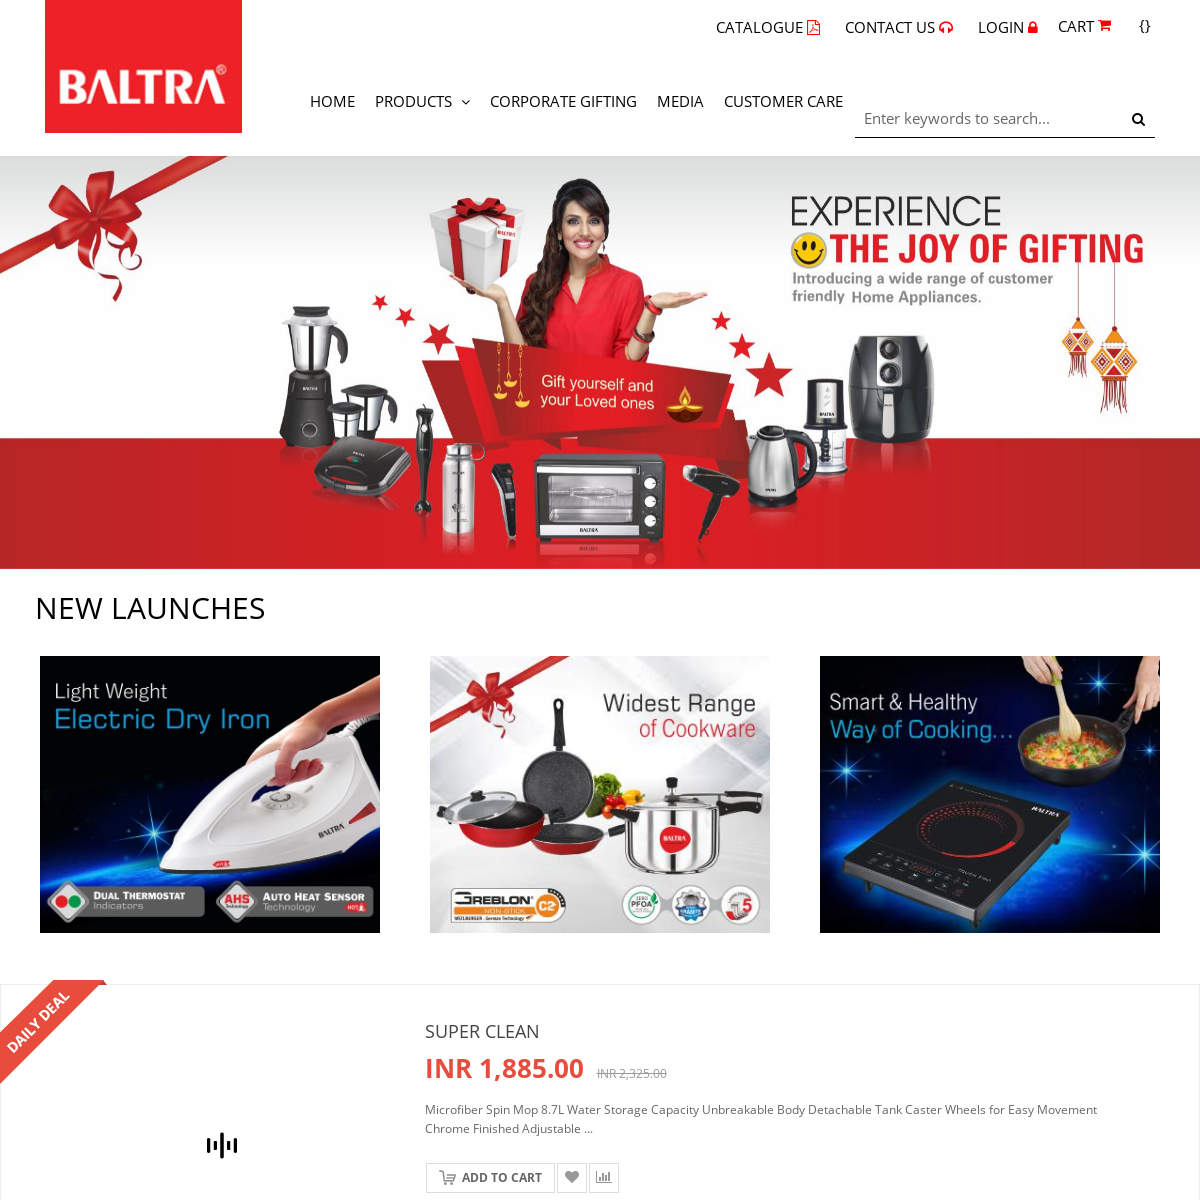 Baltra- Top 10 Home Appliances Brands in India, Home & Kitchen Appliances Manufacturer in India